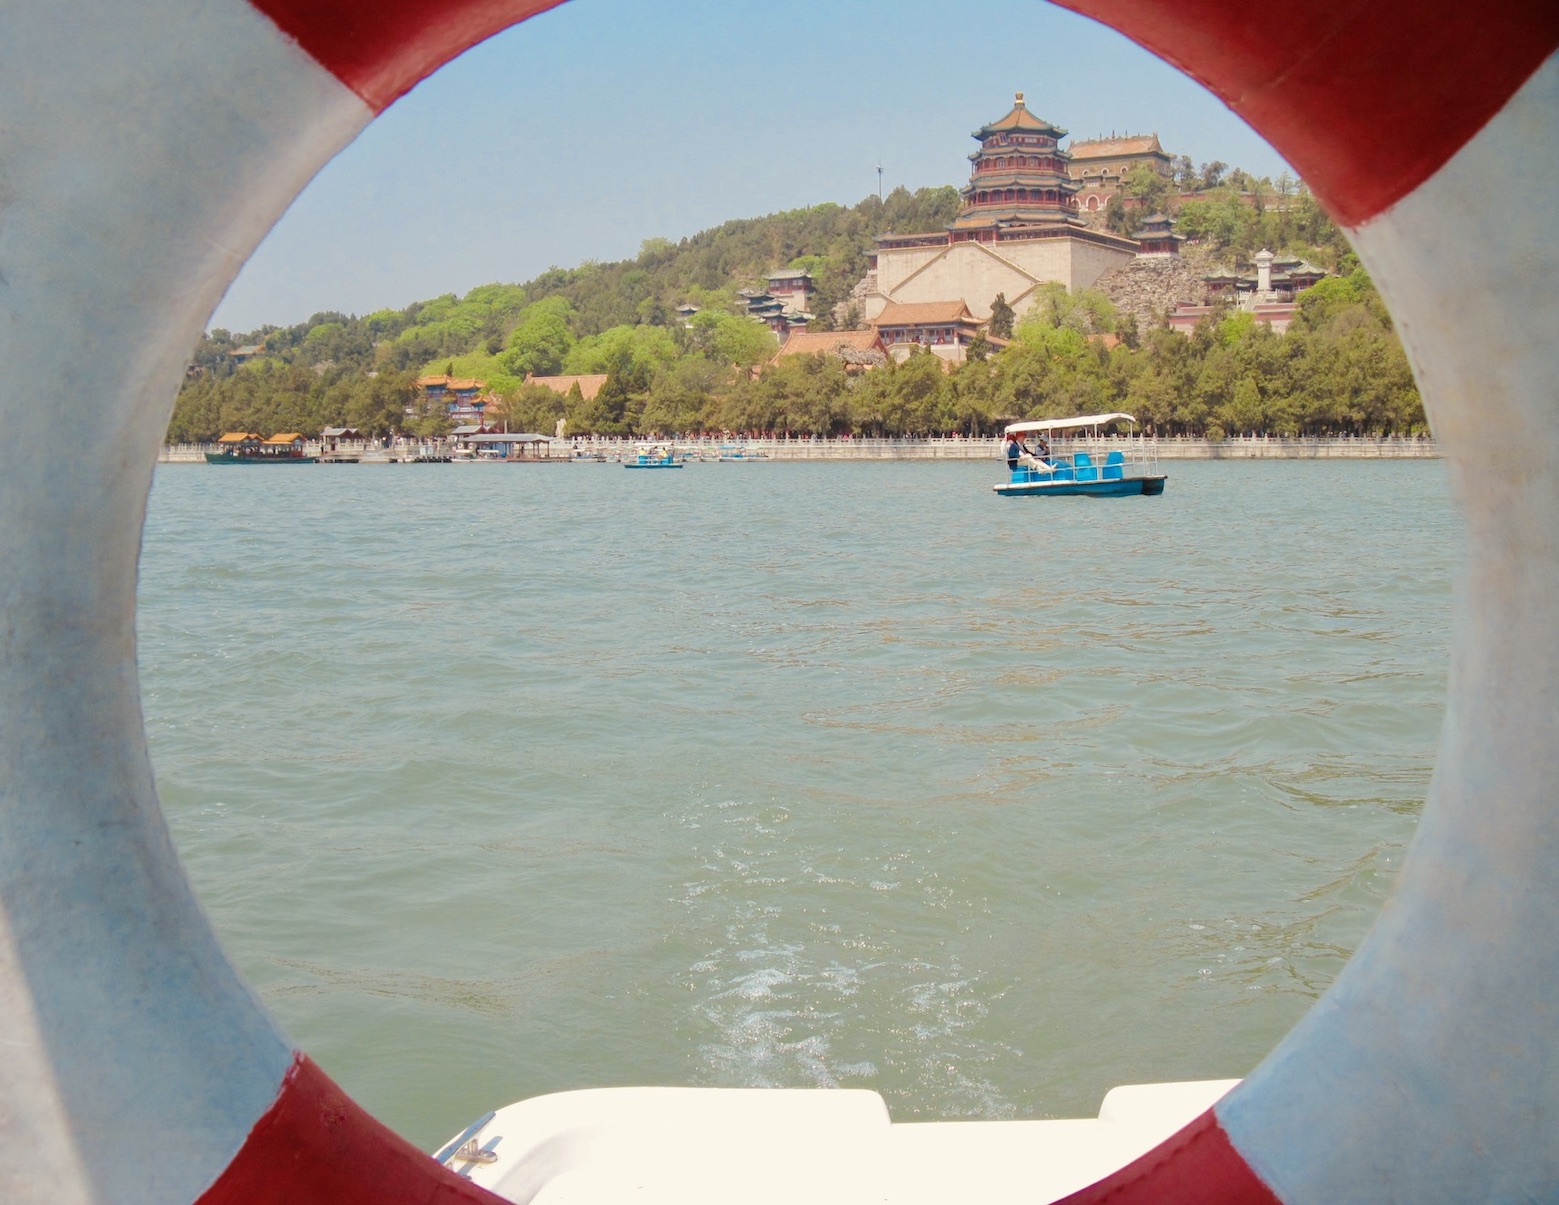 Visit China The Summer Palace in Beijing.